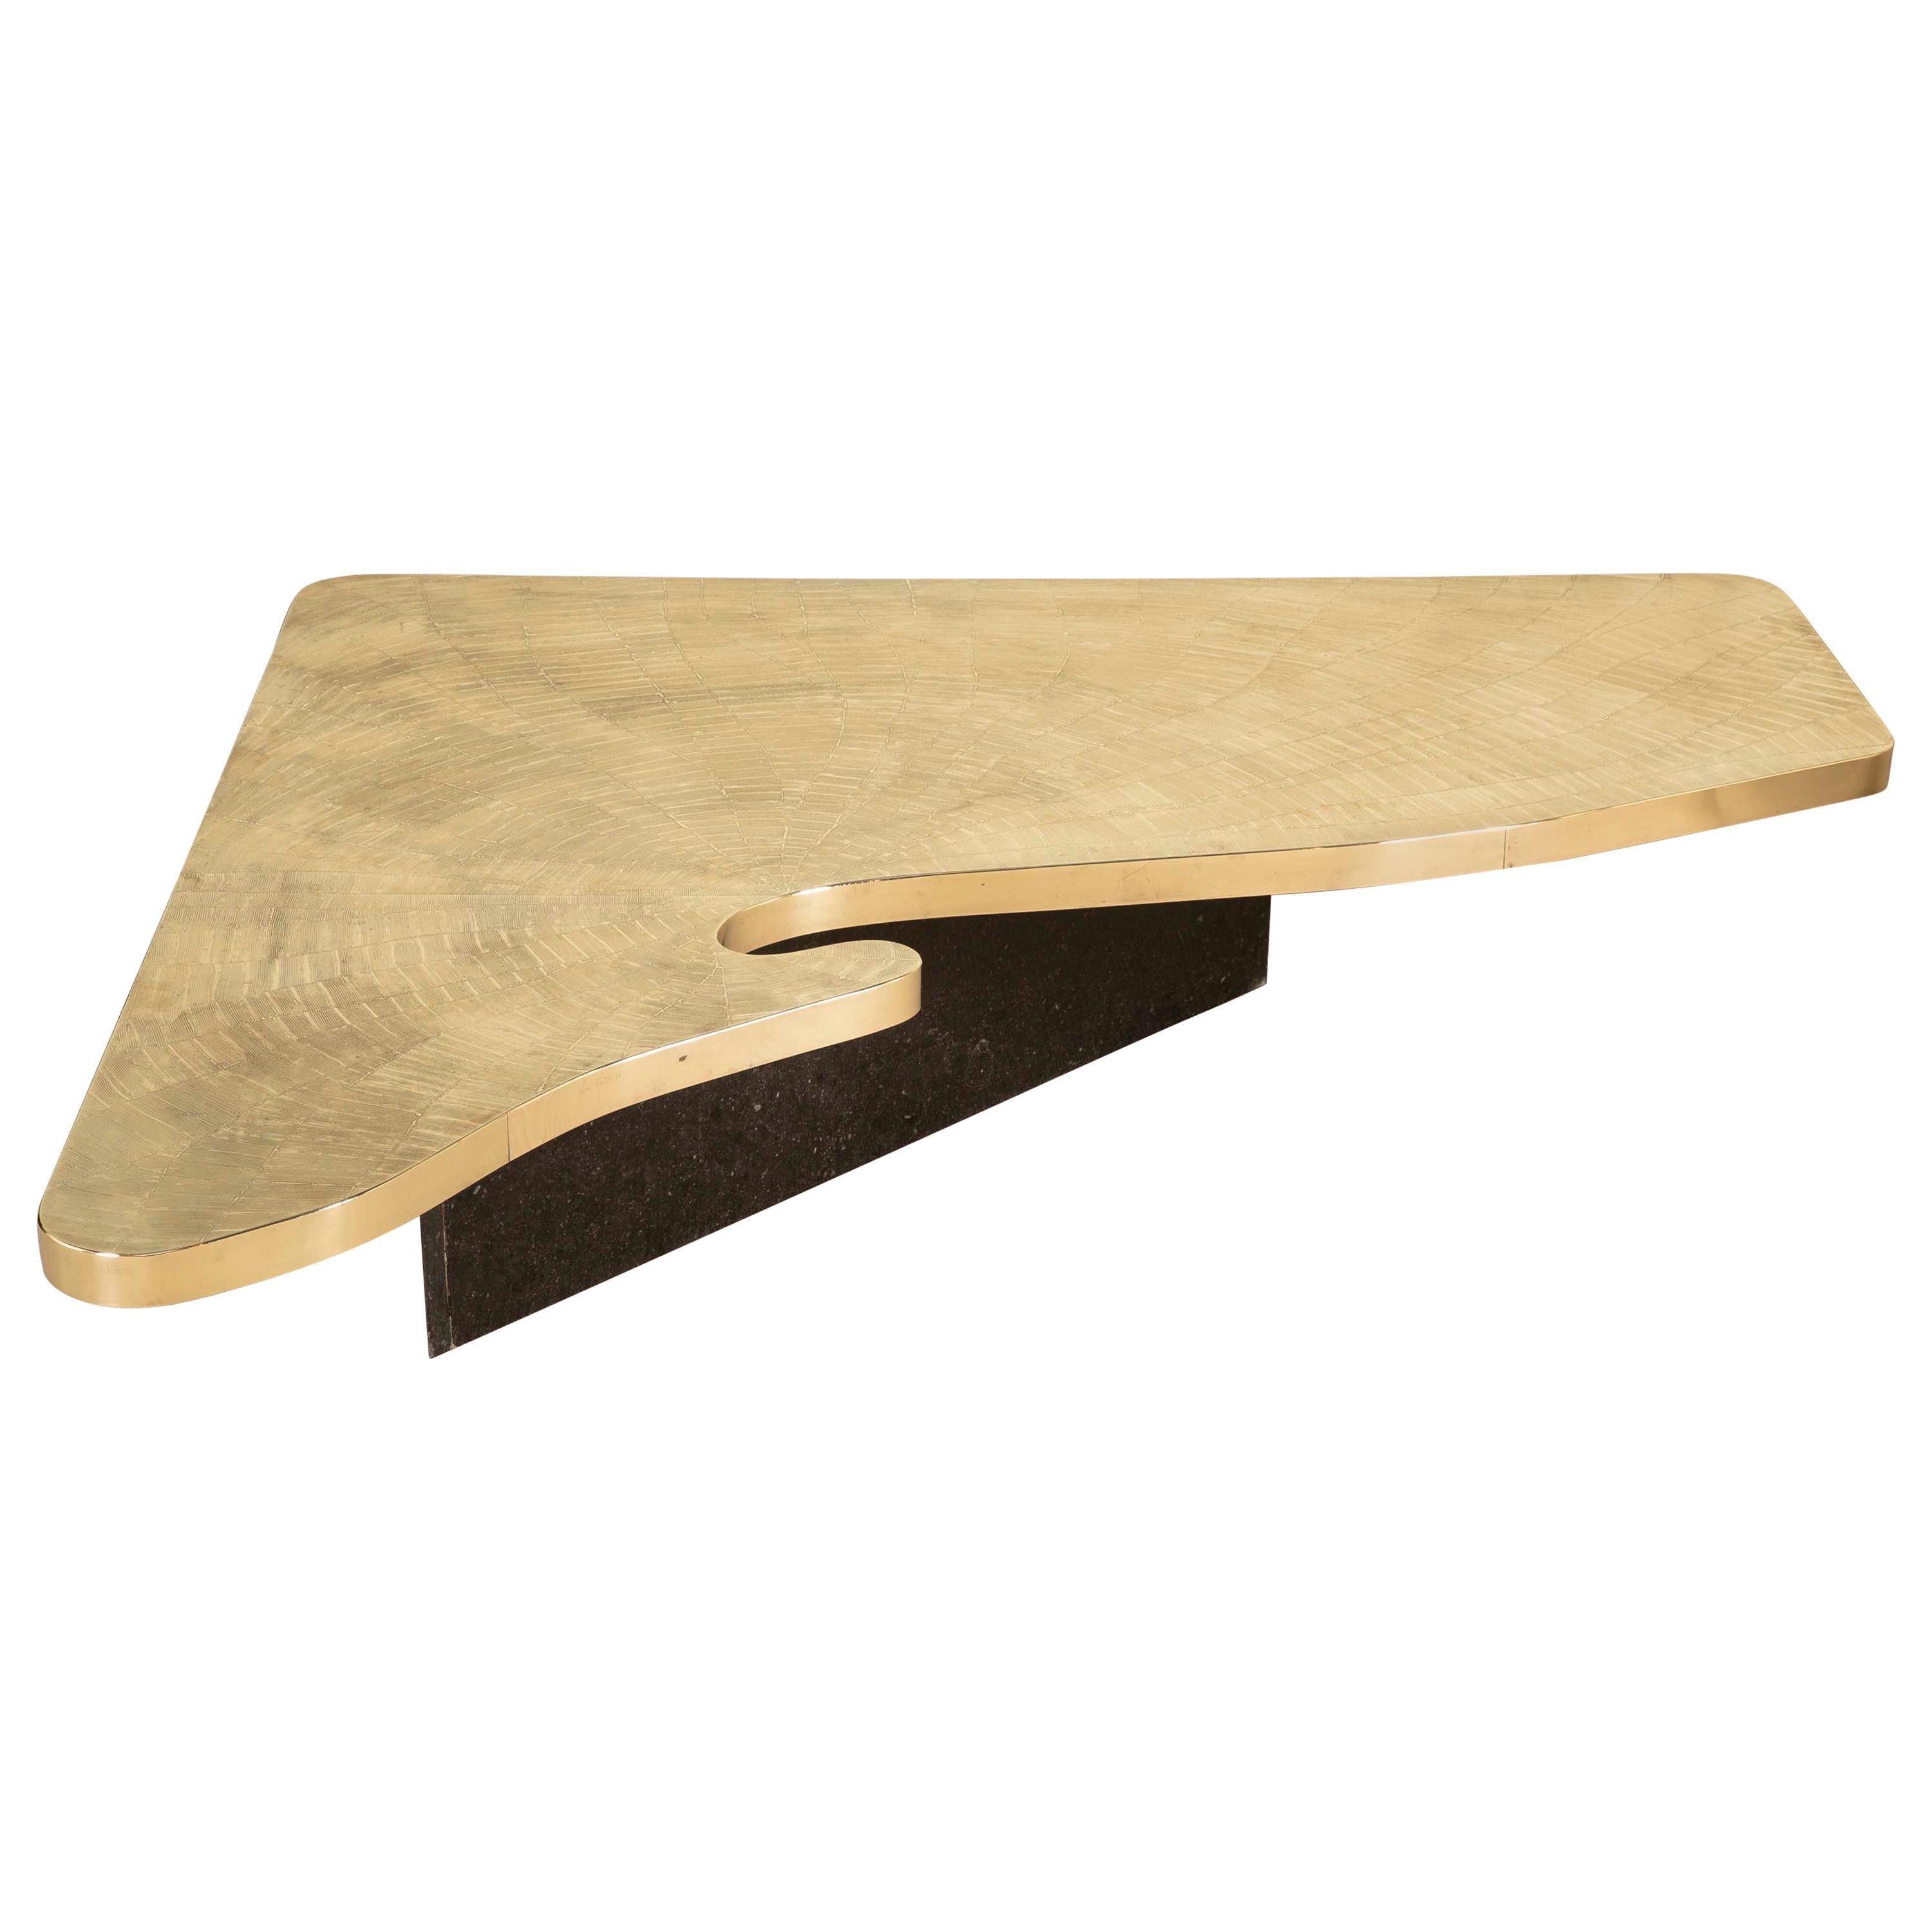 Custom Designed Etched Brass Coffee Table by Lova Creations